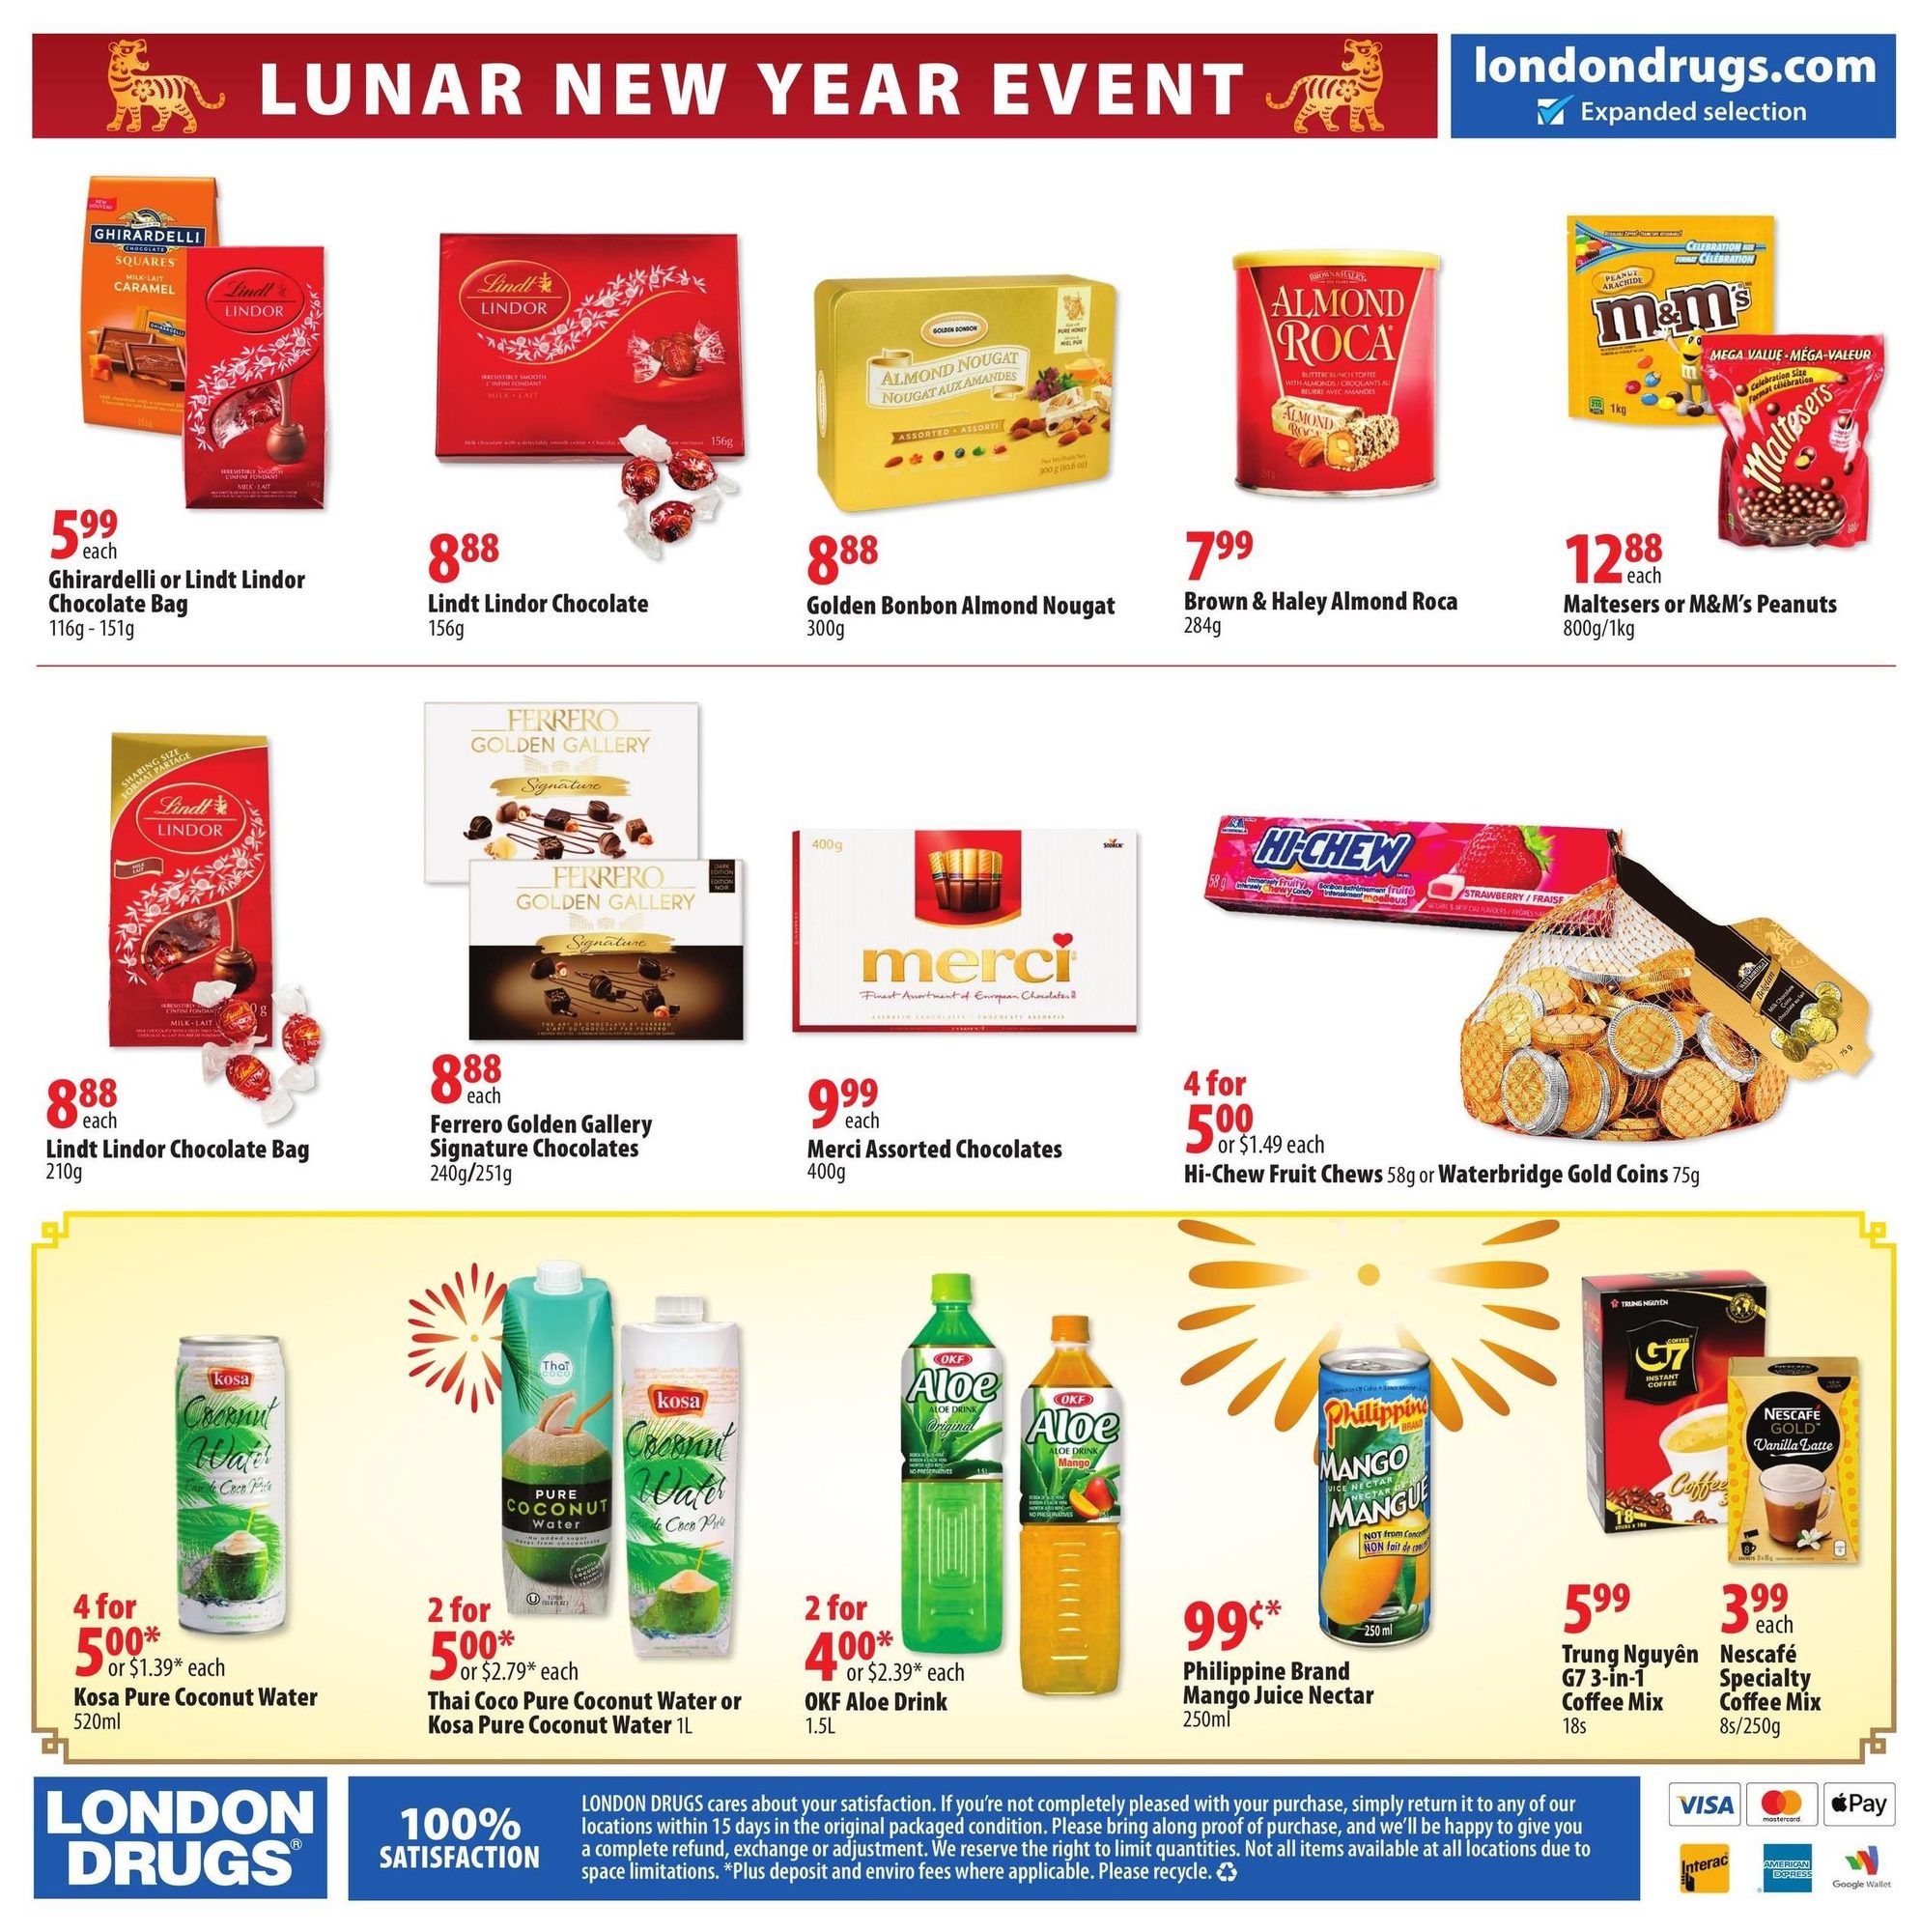 London Drugs - Lunar New Year Event - Page 5